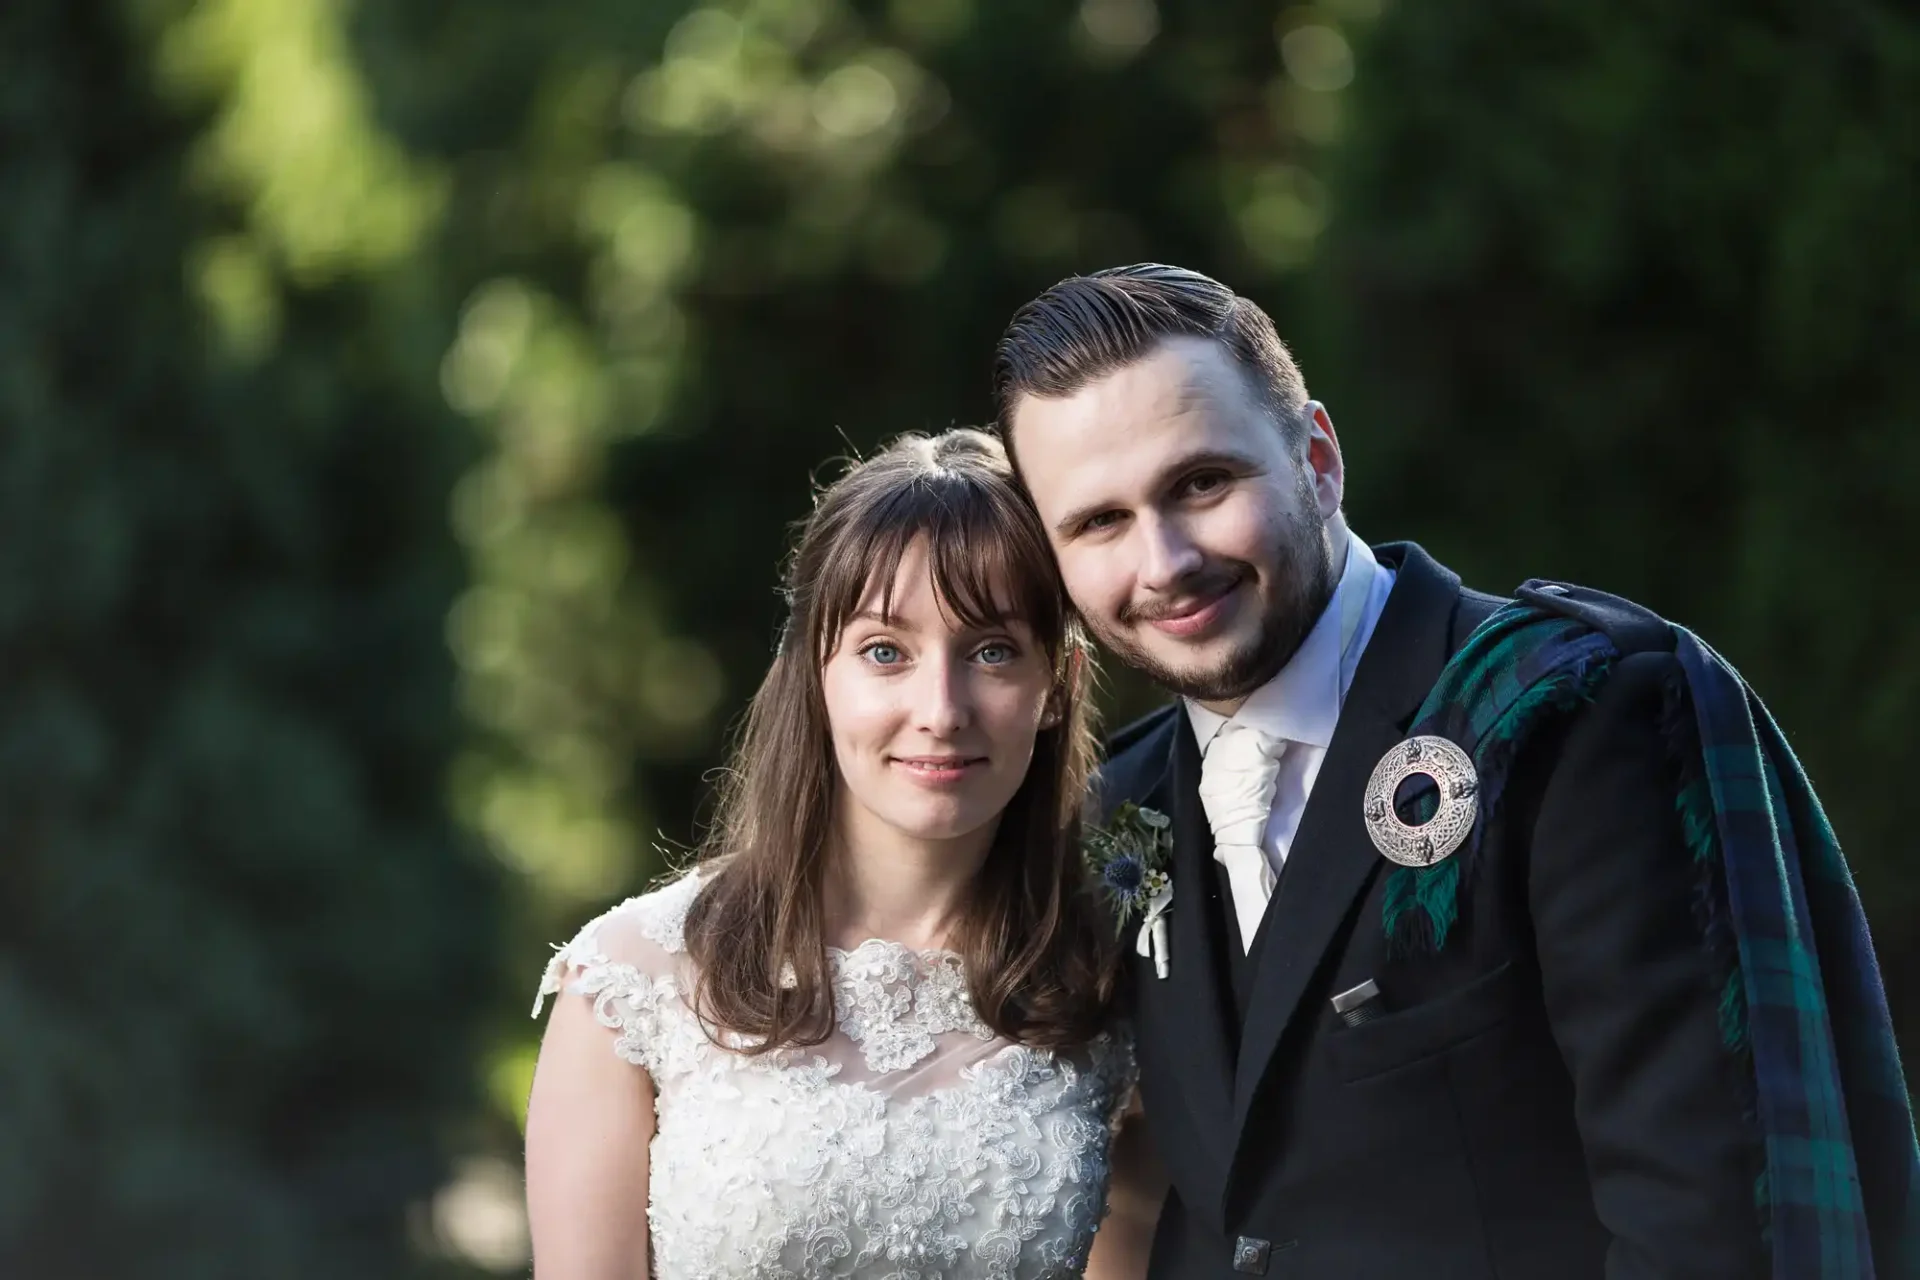 A bride and groom smiling outdoors, with the groom wearing a tartan kilt and the bride in a lace dress.